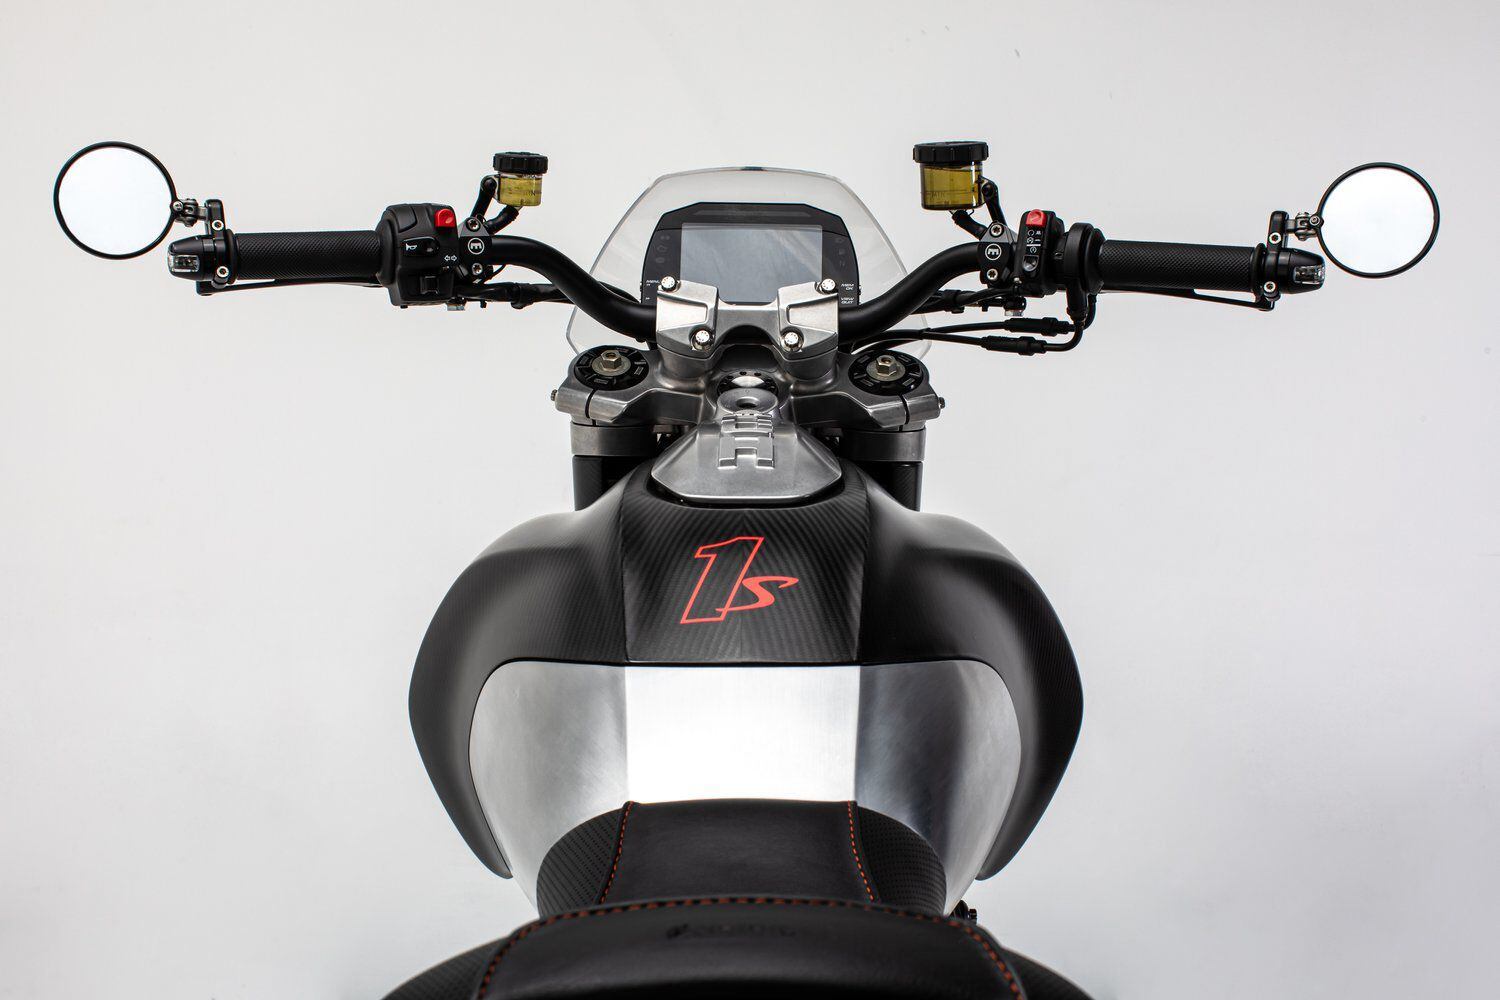 The 1s cockpit features a wide, low handlebar and Arch's own-designed TFT digital instrumentation.